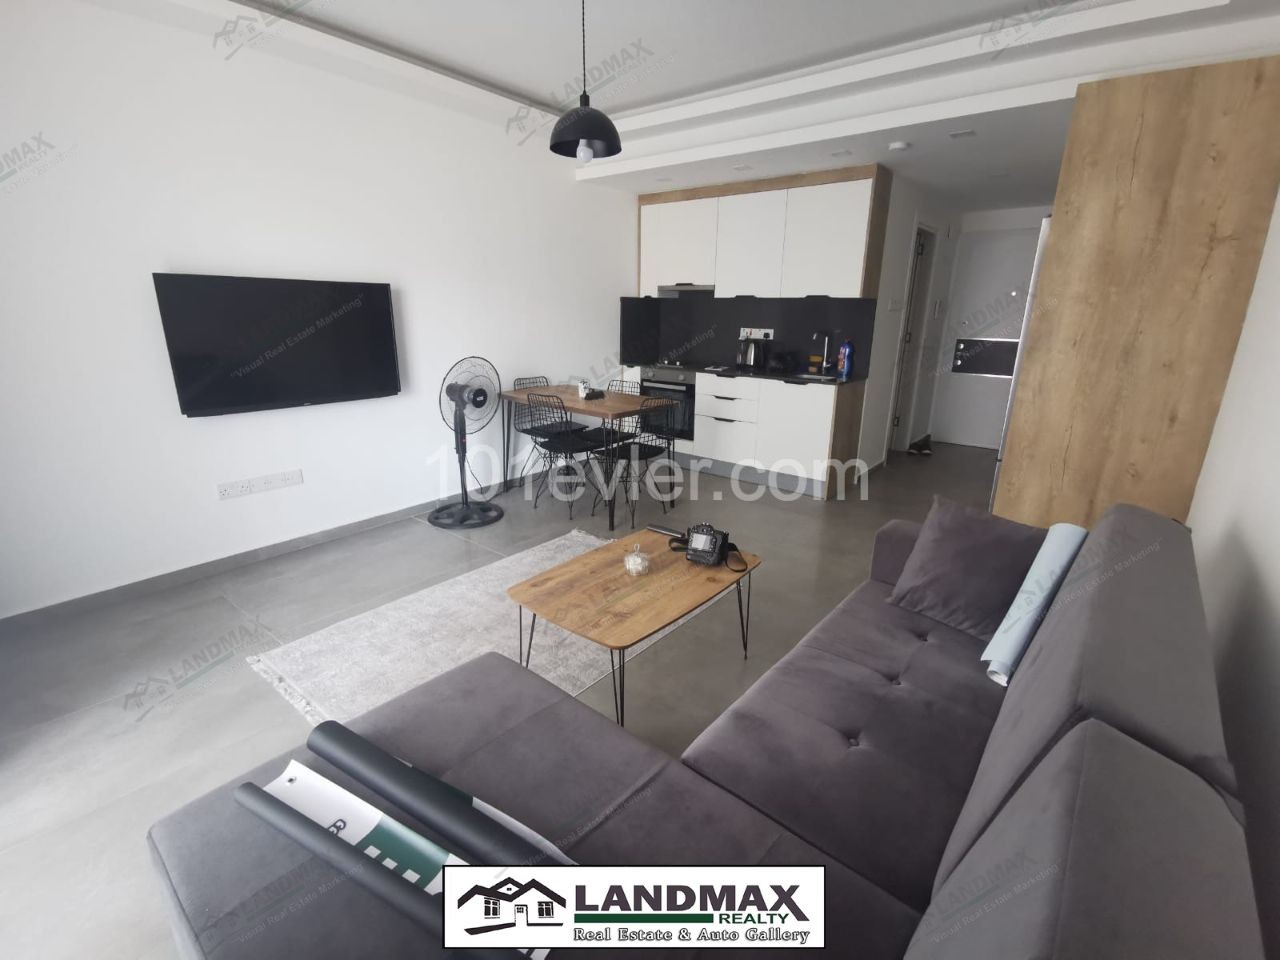 Luxurious Studio For sale and rent, Famagusta, Terrace park